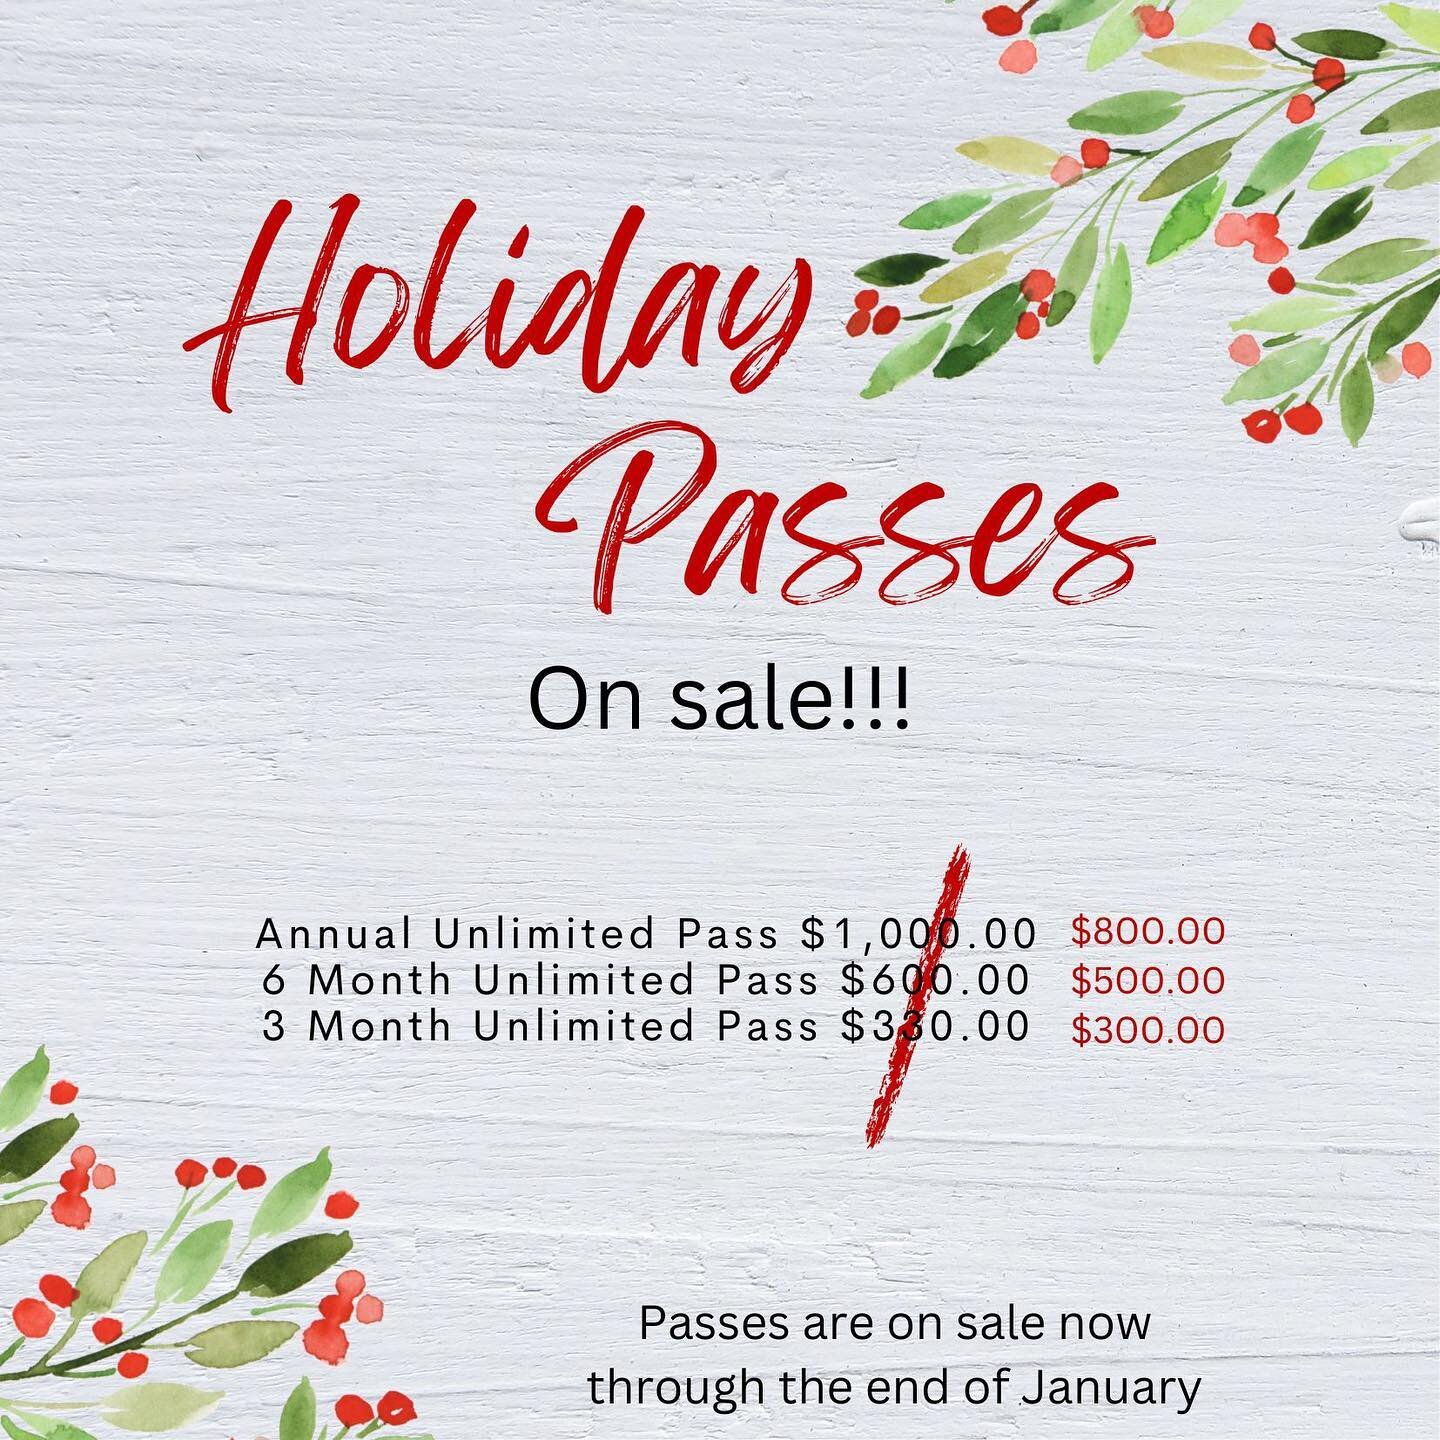 Our Class Passes are in a holiday sale through the end of January. Treat yourself or someone you know loves to the gift of moving well. #movetruabq #movnat #abq #movingwell #movement #exercise